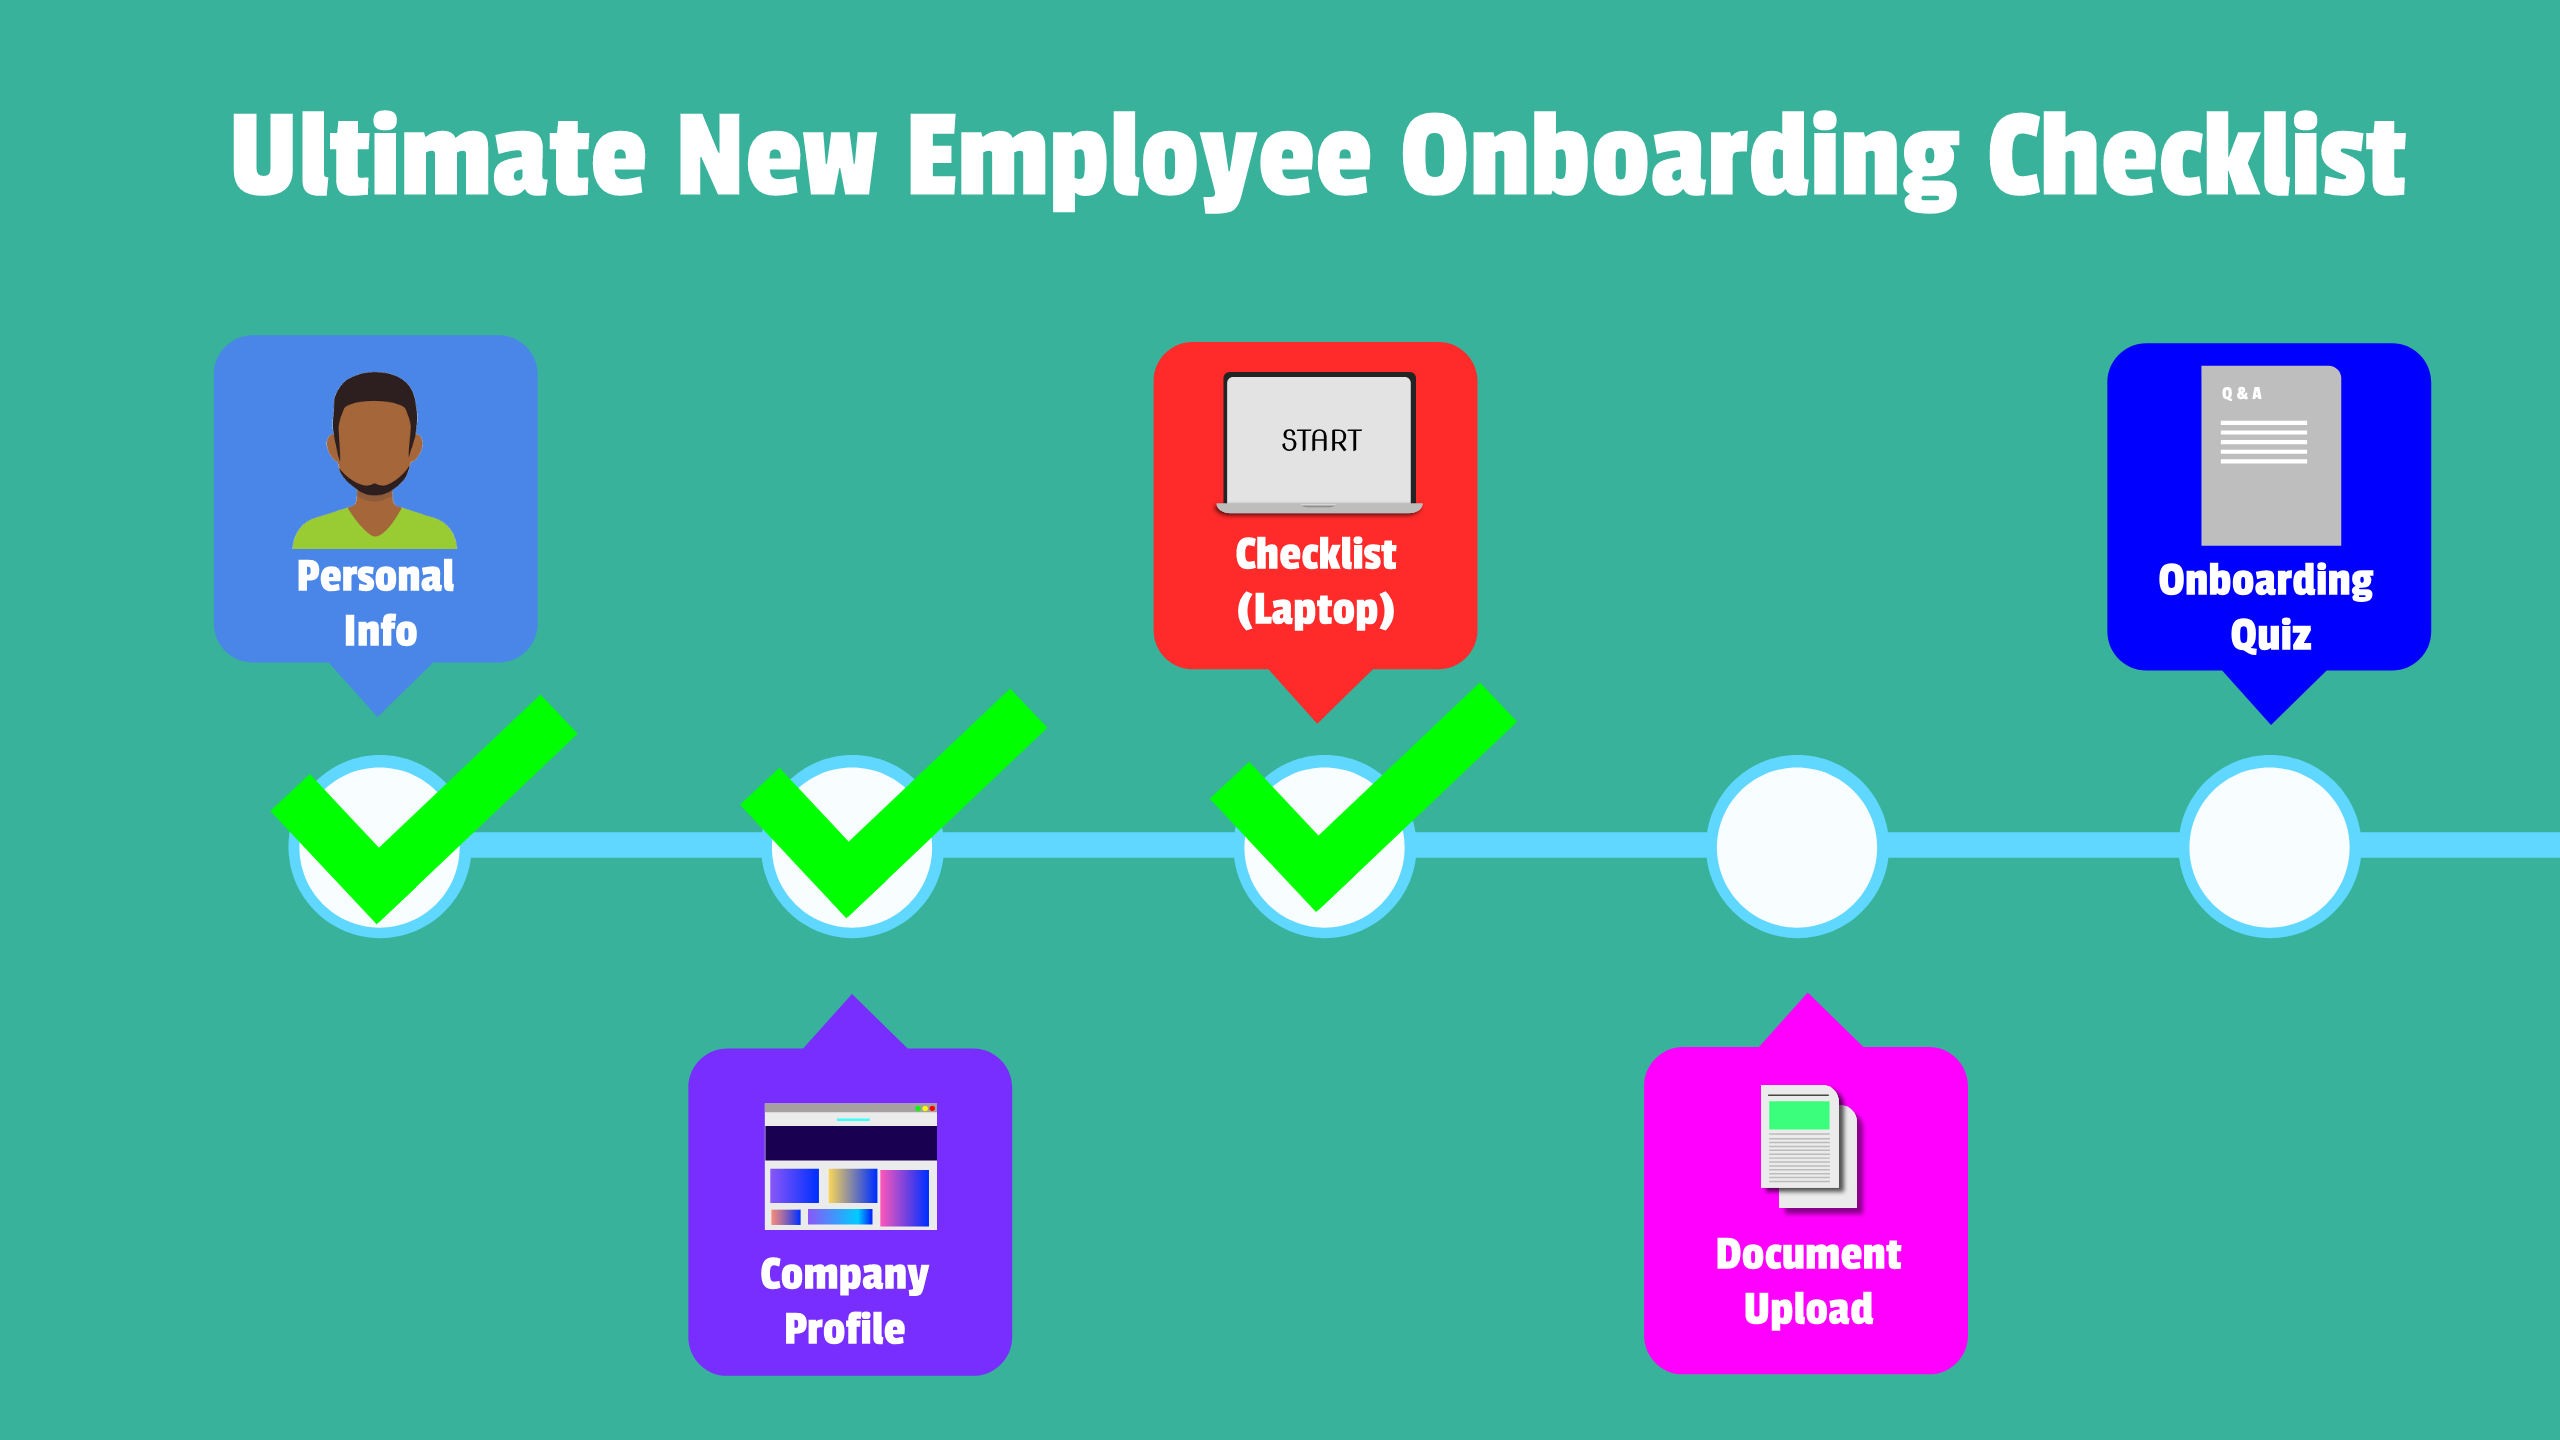 Onboarding Stages